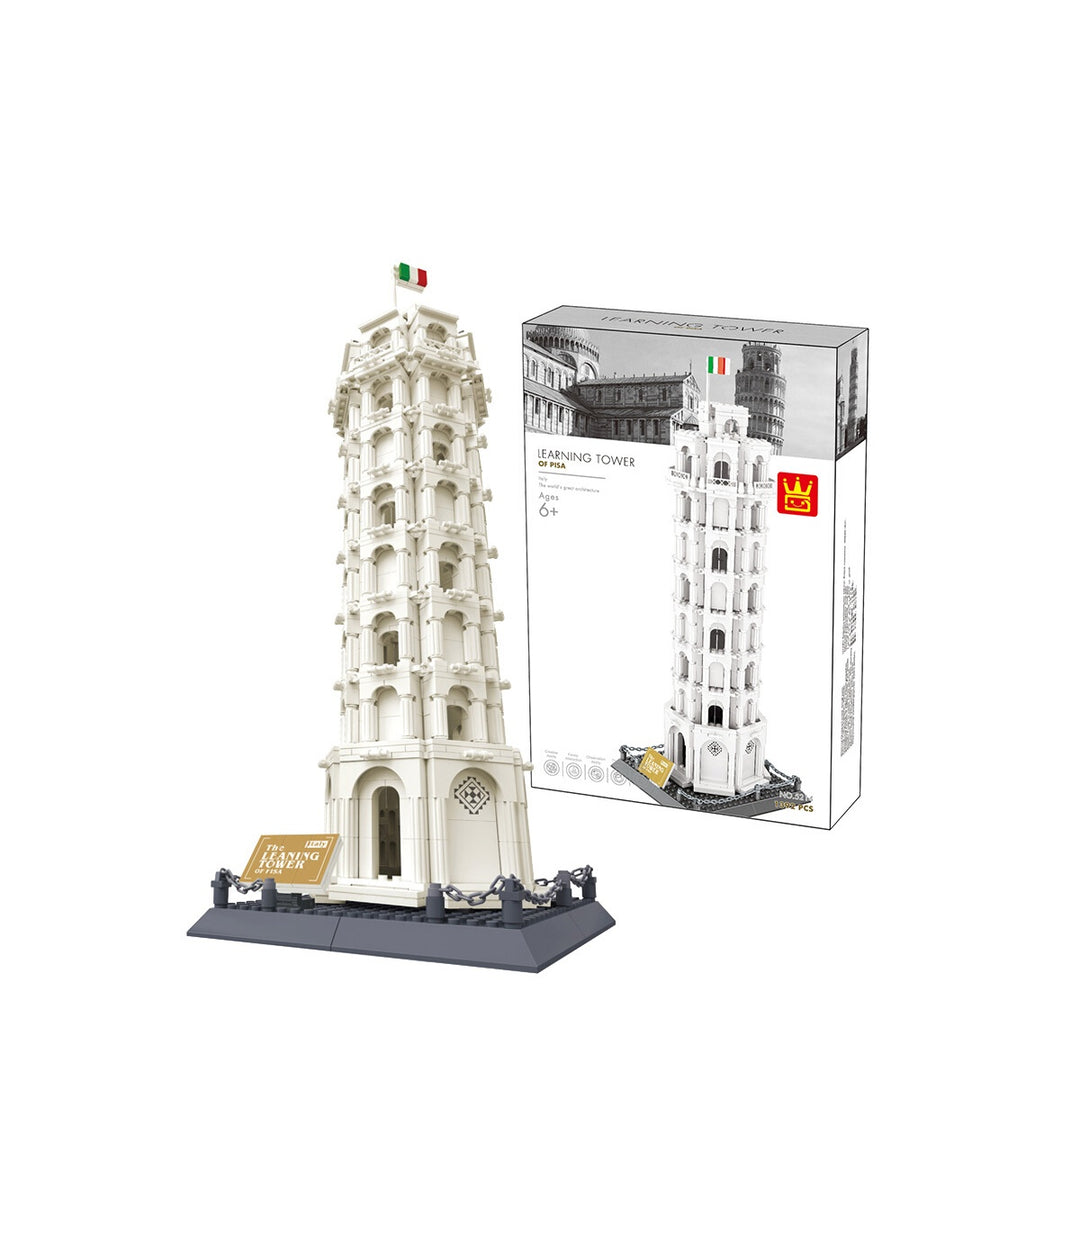 WANGE 5214 Intricate brick set of the Leaning Tower of Pisa. Box design may vary. Sold by Brick Loot with or without the retail box. 